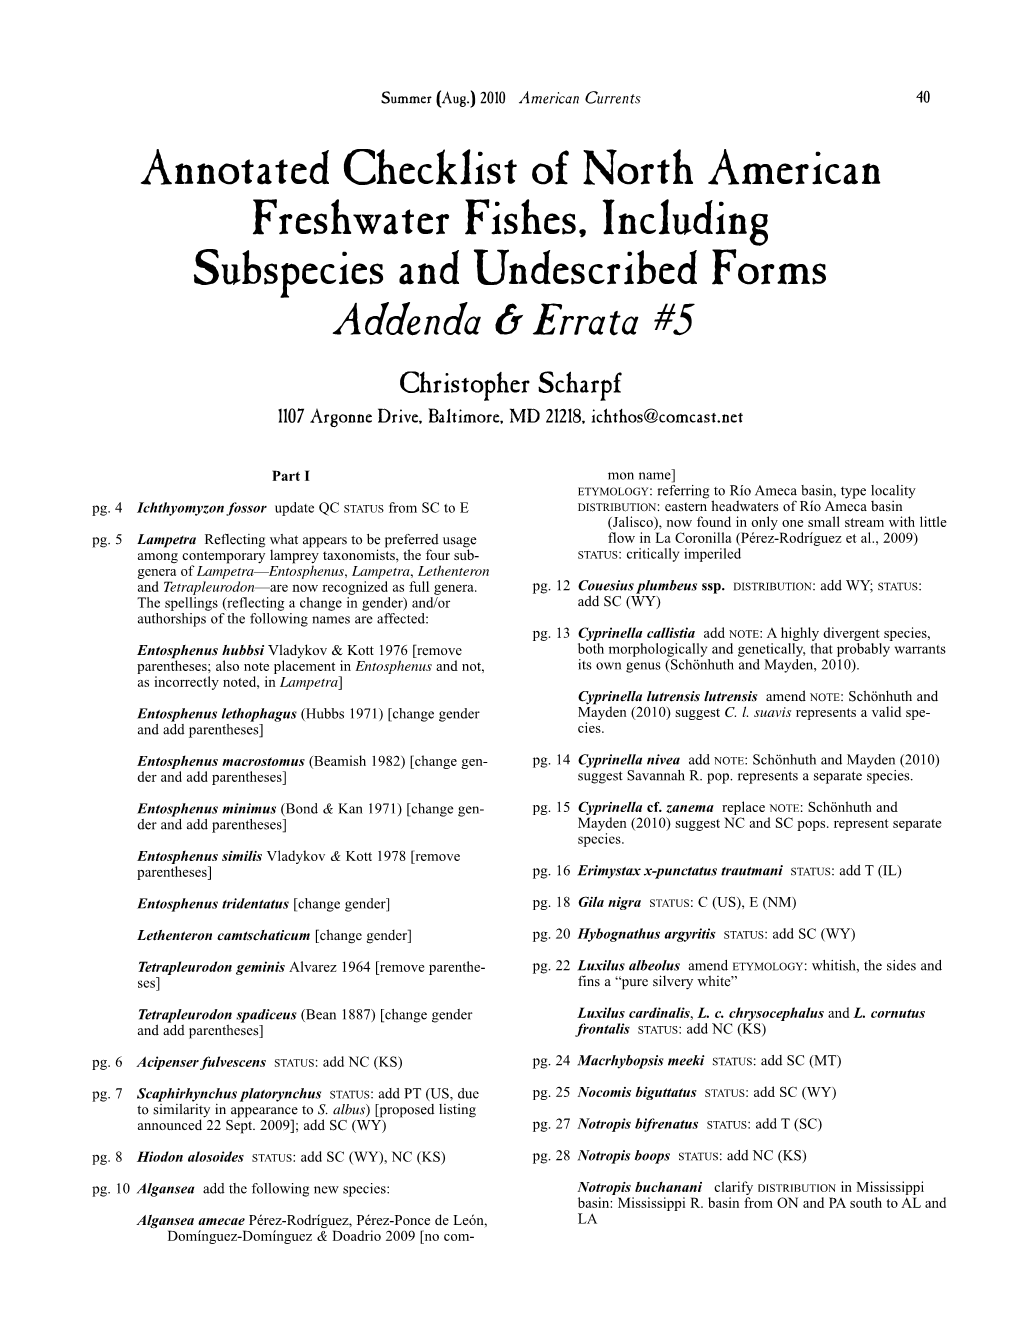 Annotated Checklist of North American Freshwater Fishes, Including Subspecies and Undescribed Forms